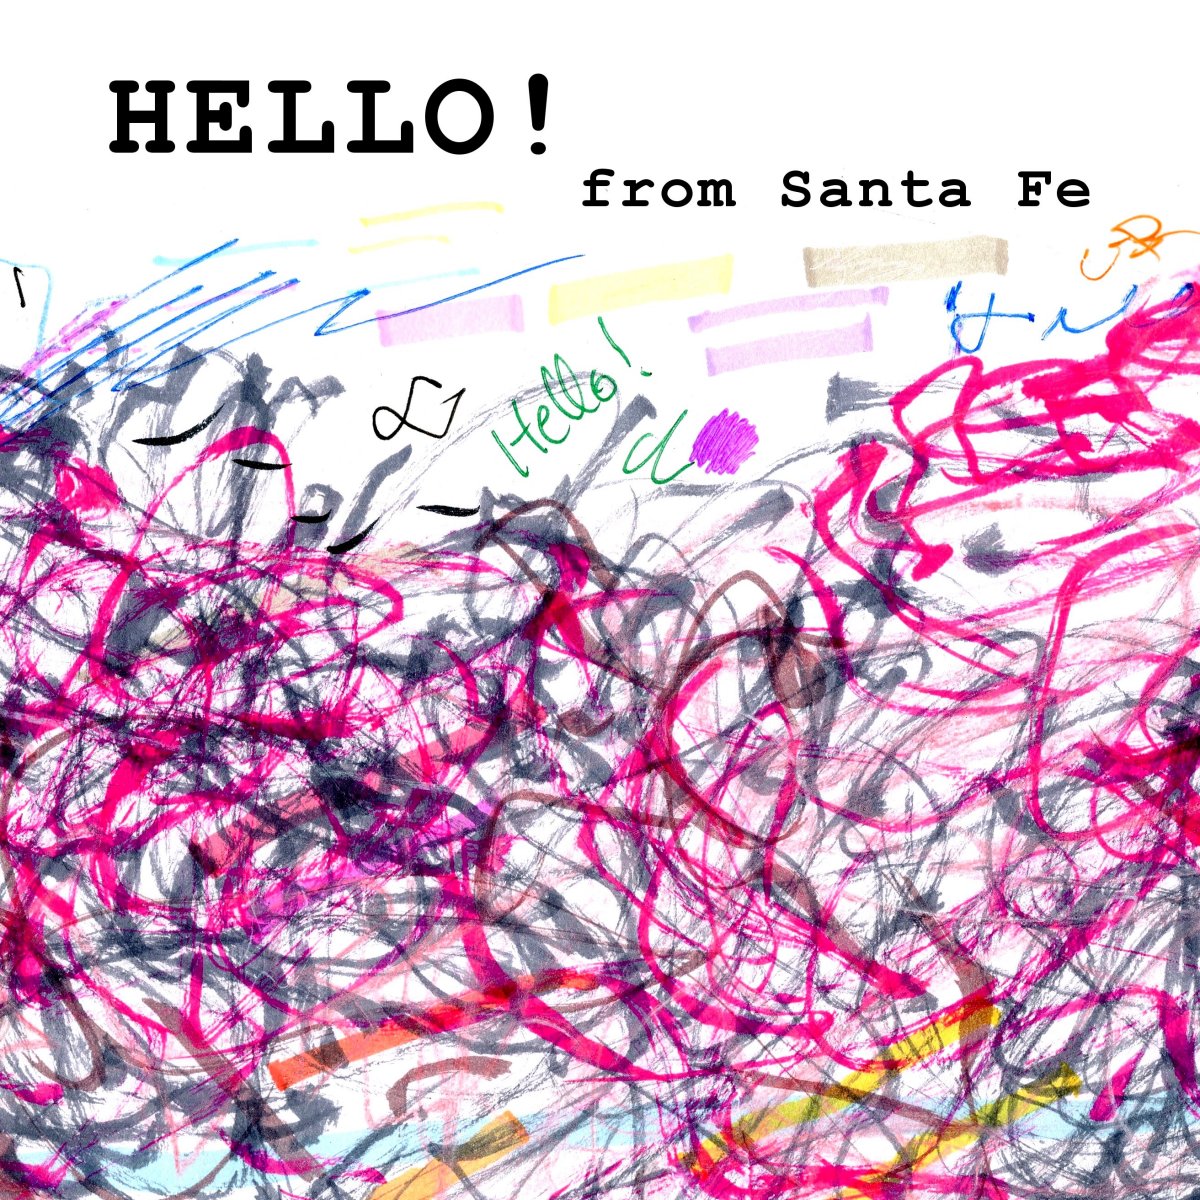 Read more about the article Hello From Santa Fe Volume #2 from Fluxus Laboratories